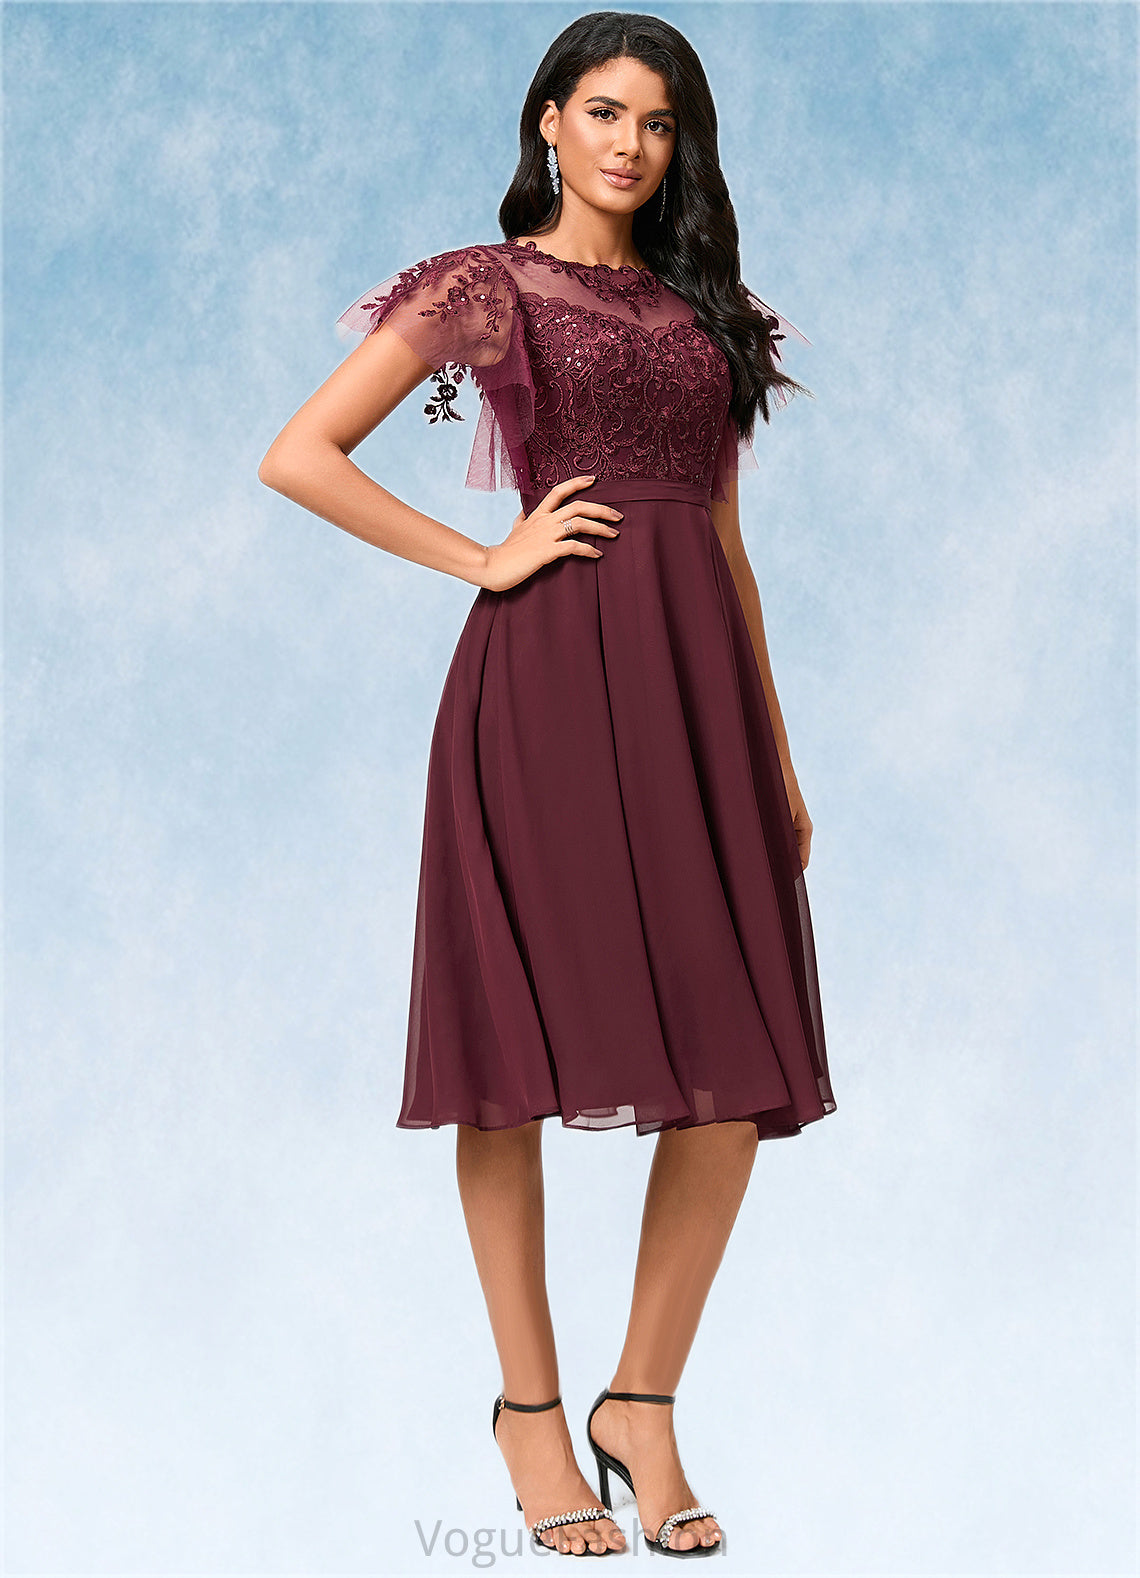 Lilly A-line Illusion Knee-Length Chiffon Cocktail Dress With Sequins DKP0022512